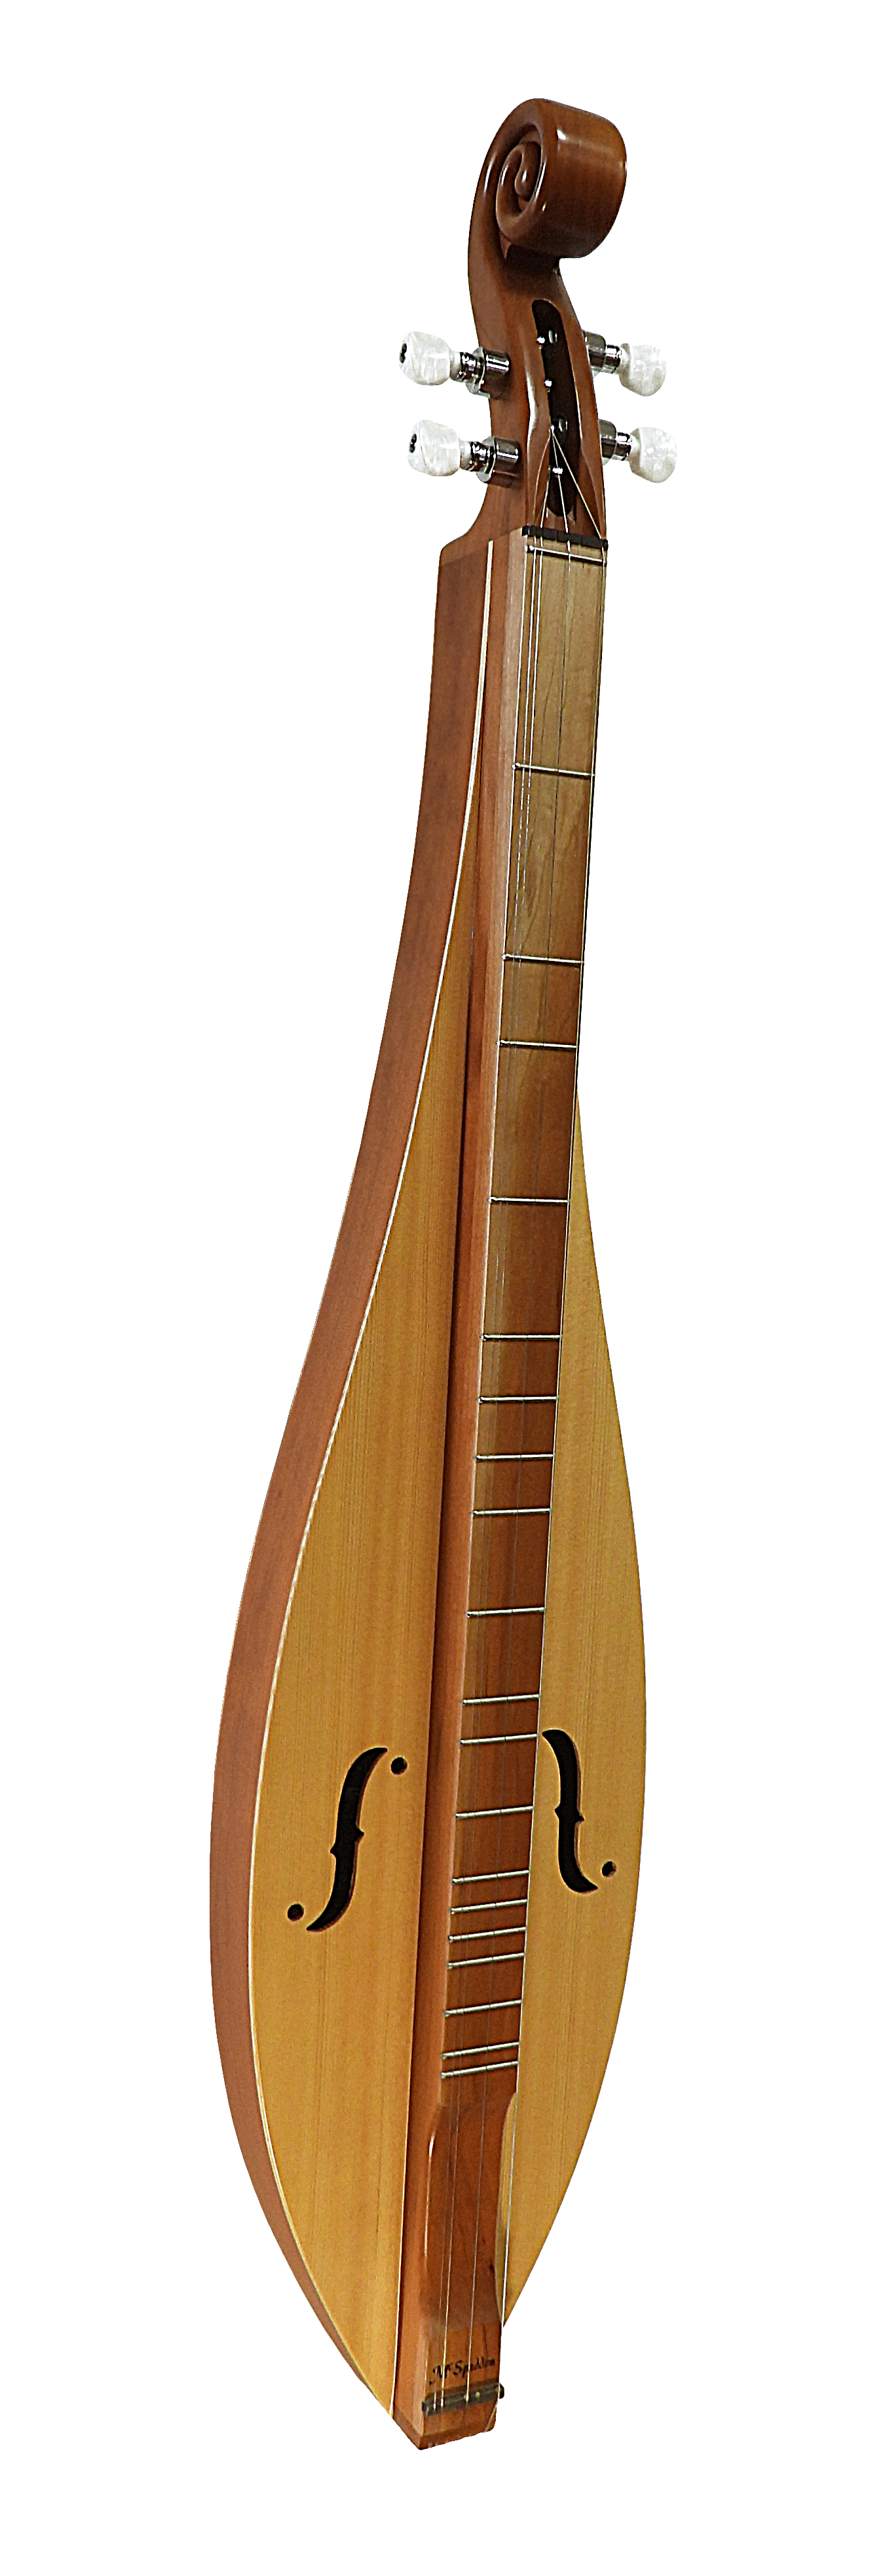 4 String, Scroll head, Teardrop with Cherry back and sides, Spruce top (4STCS)